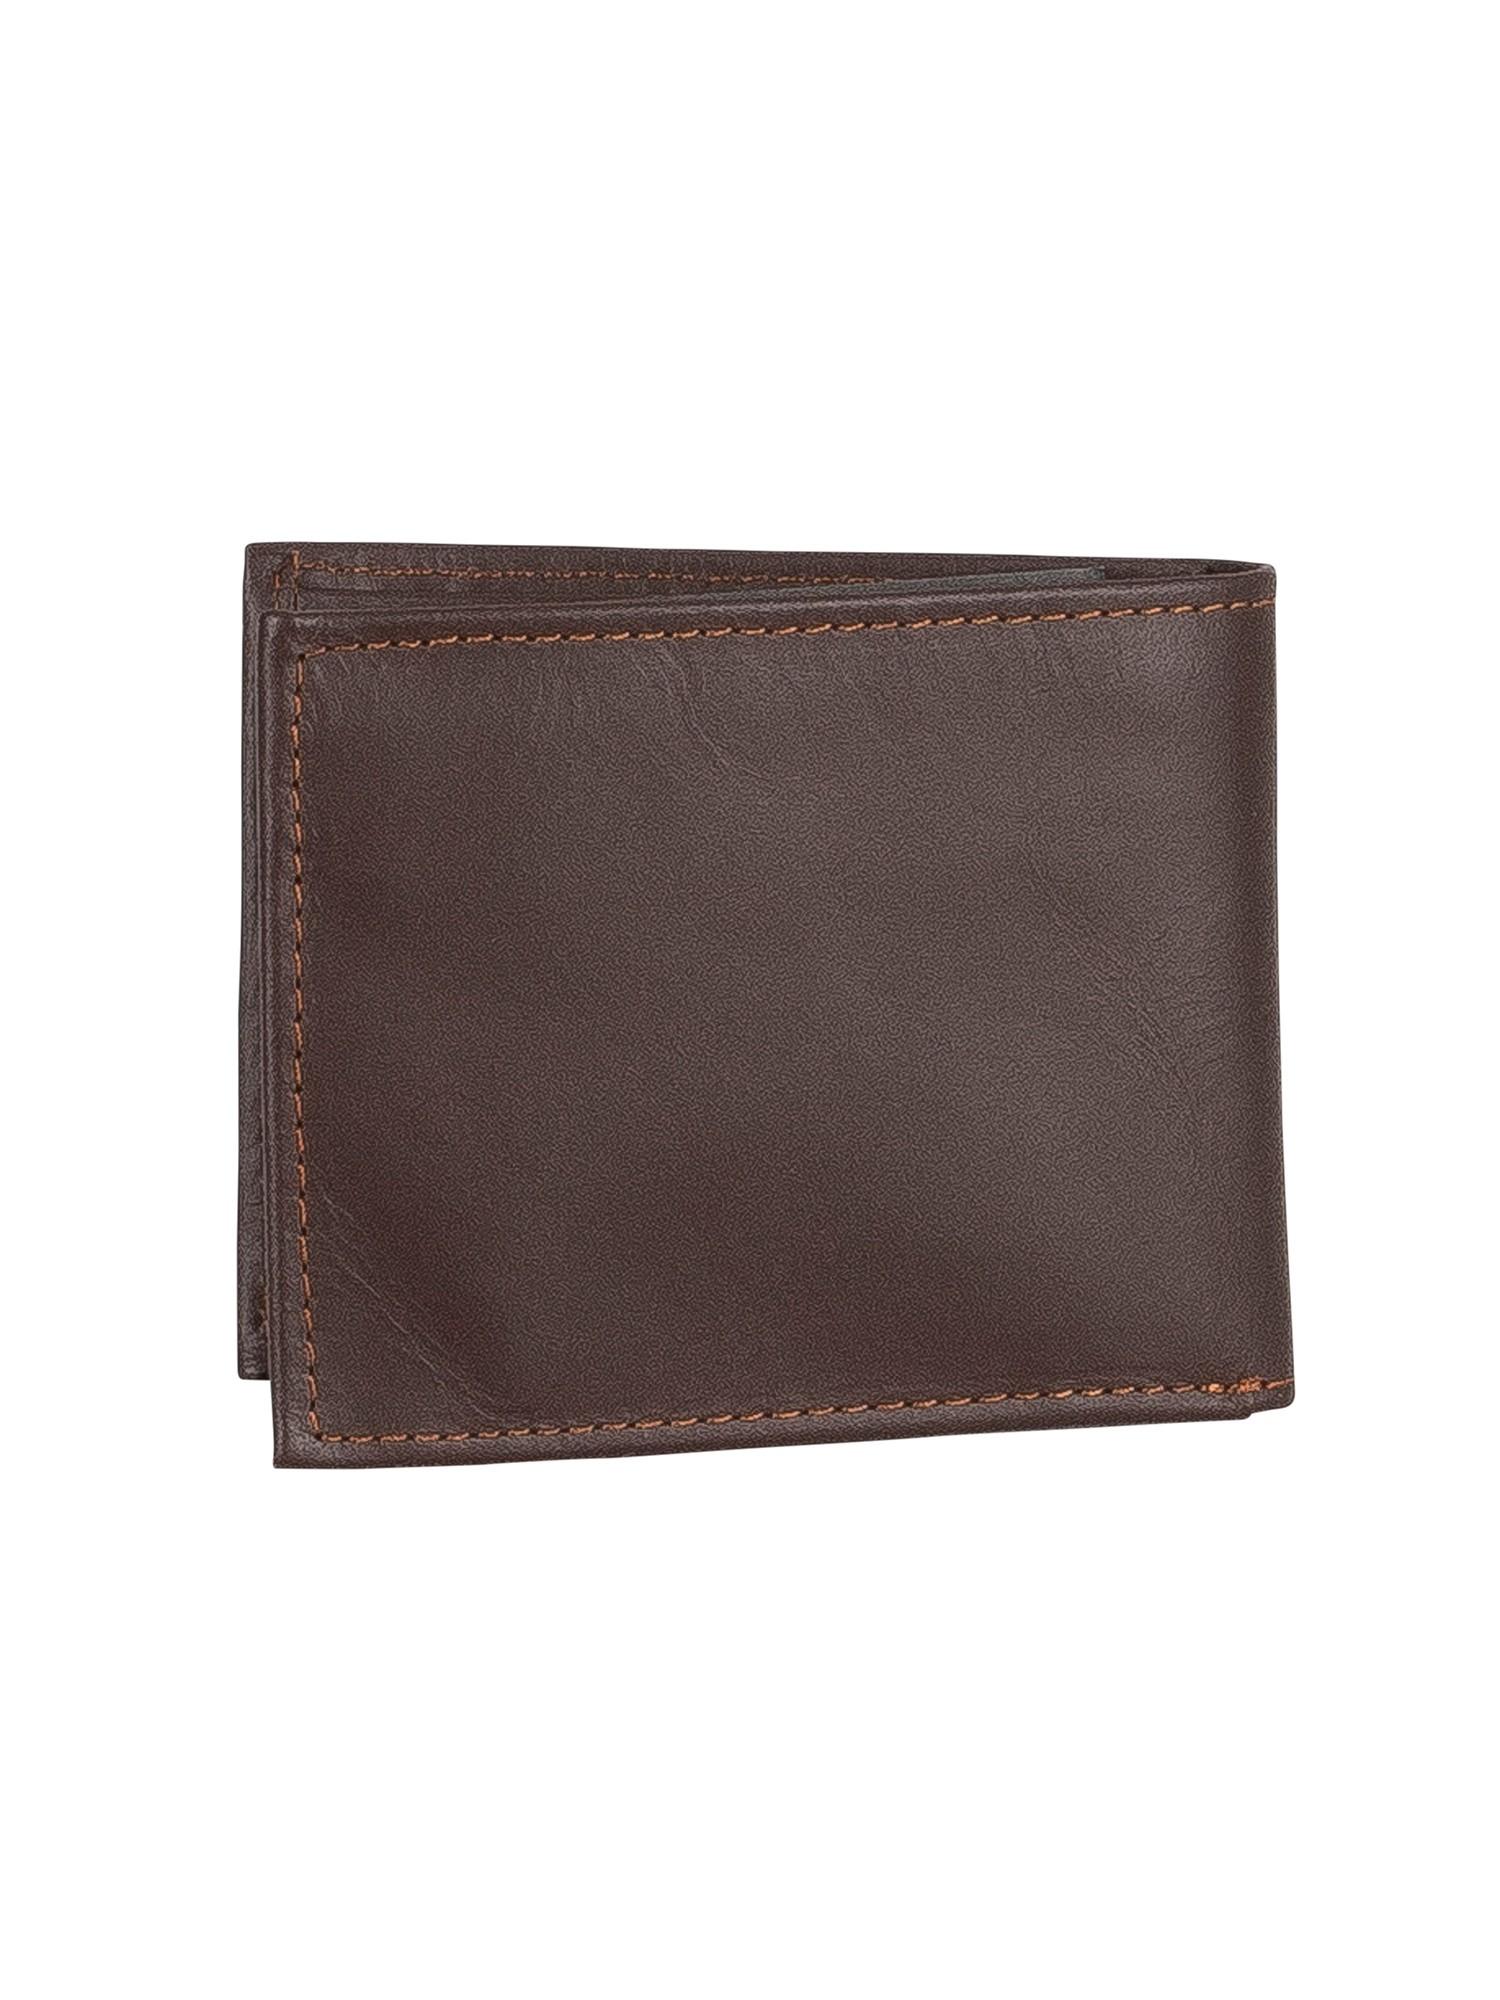 Levi's Casual Classics Leather Wallet in Brown for Men | Lyst